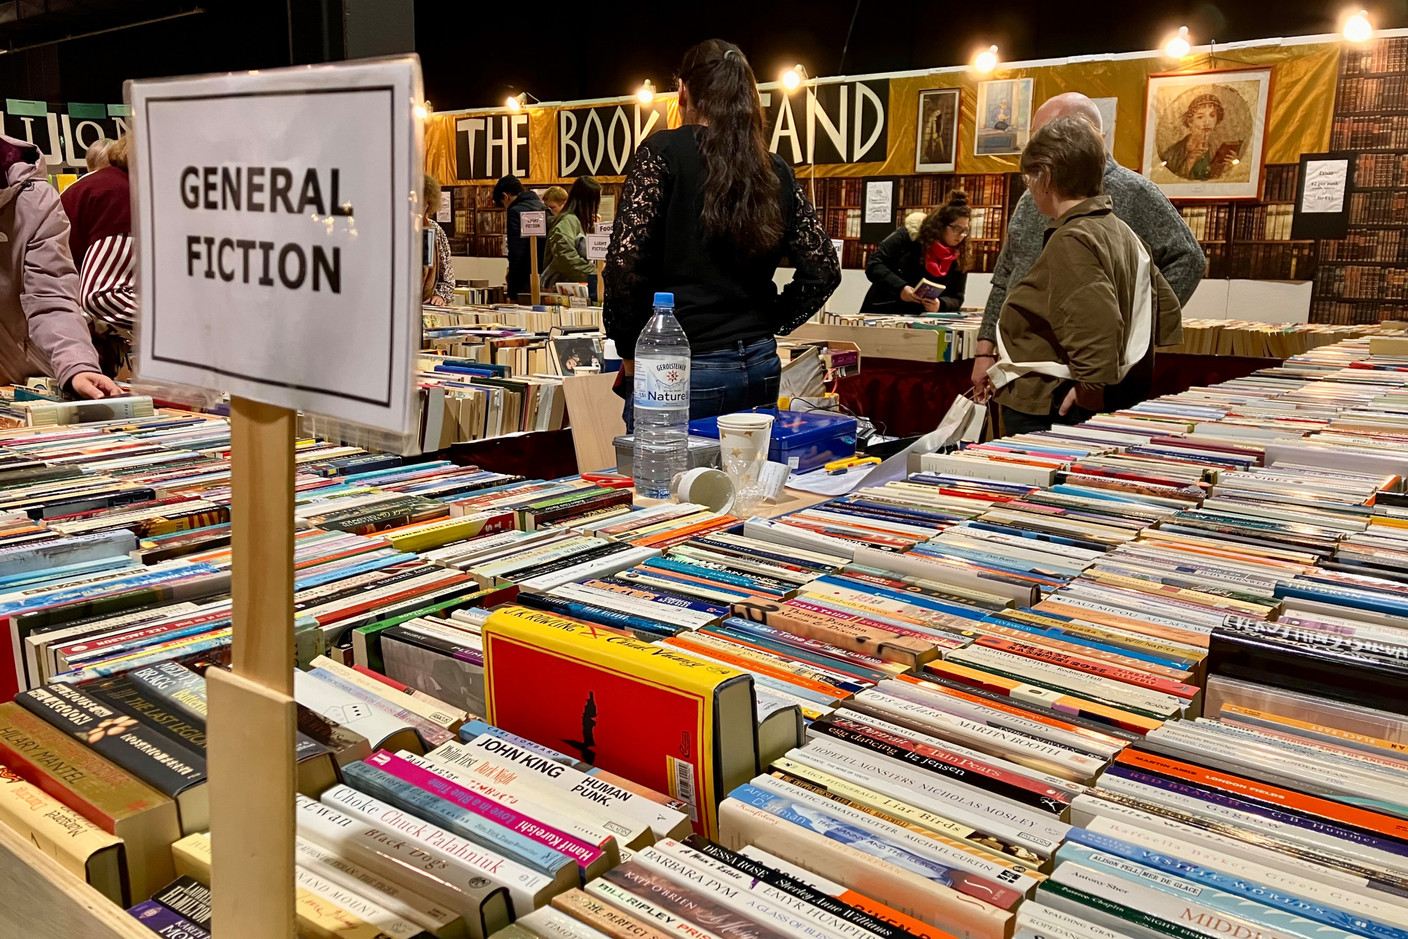 Visitors to the Bazar could buy secondhand books--children books, reference books and dictionaries, fiction and non-fiction, on a variety of topics and in several different languages--from the book stand, Photo: Lydia Linna/Maison Moderne